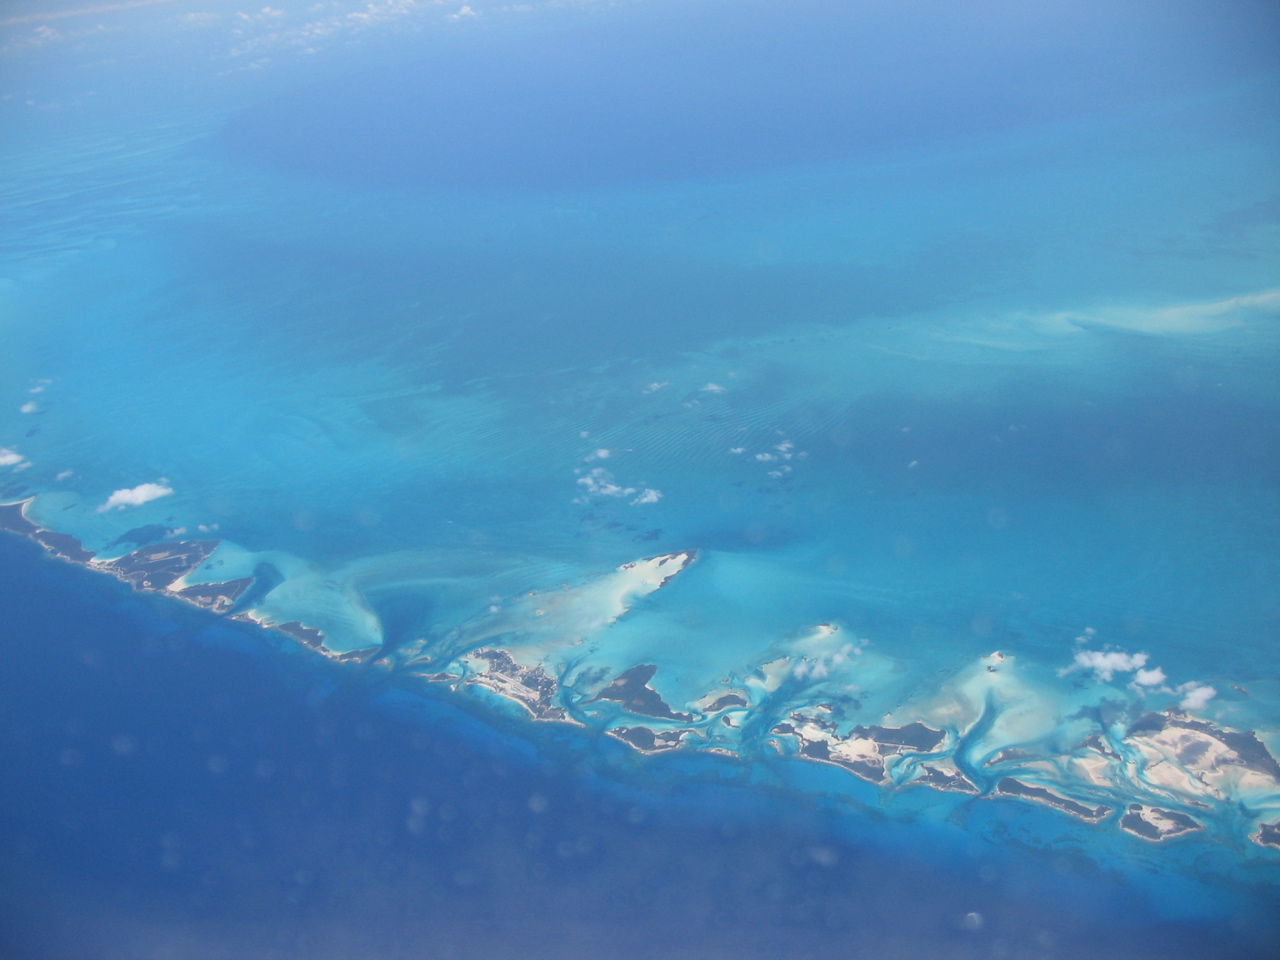 From the plane, over the Bahamas